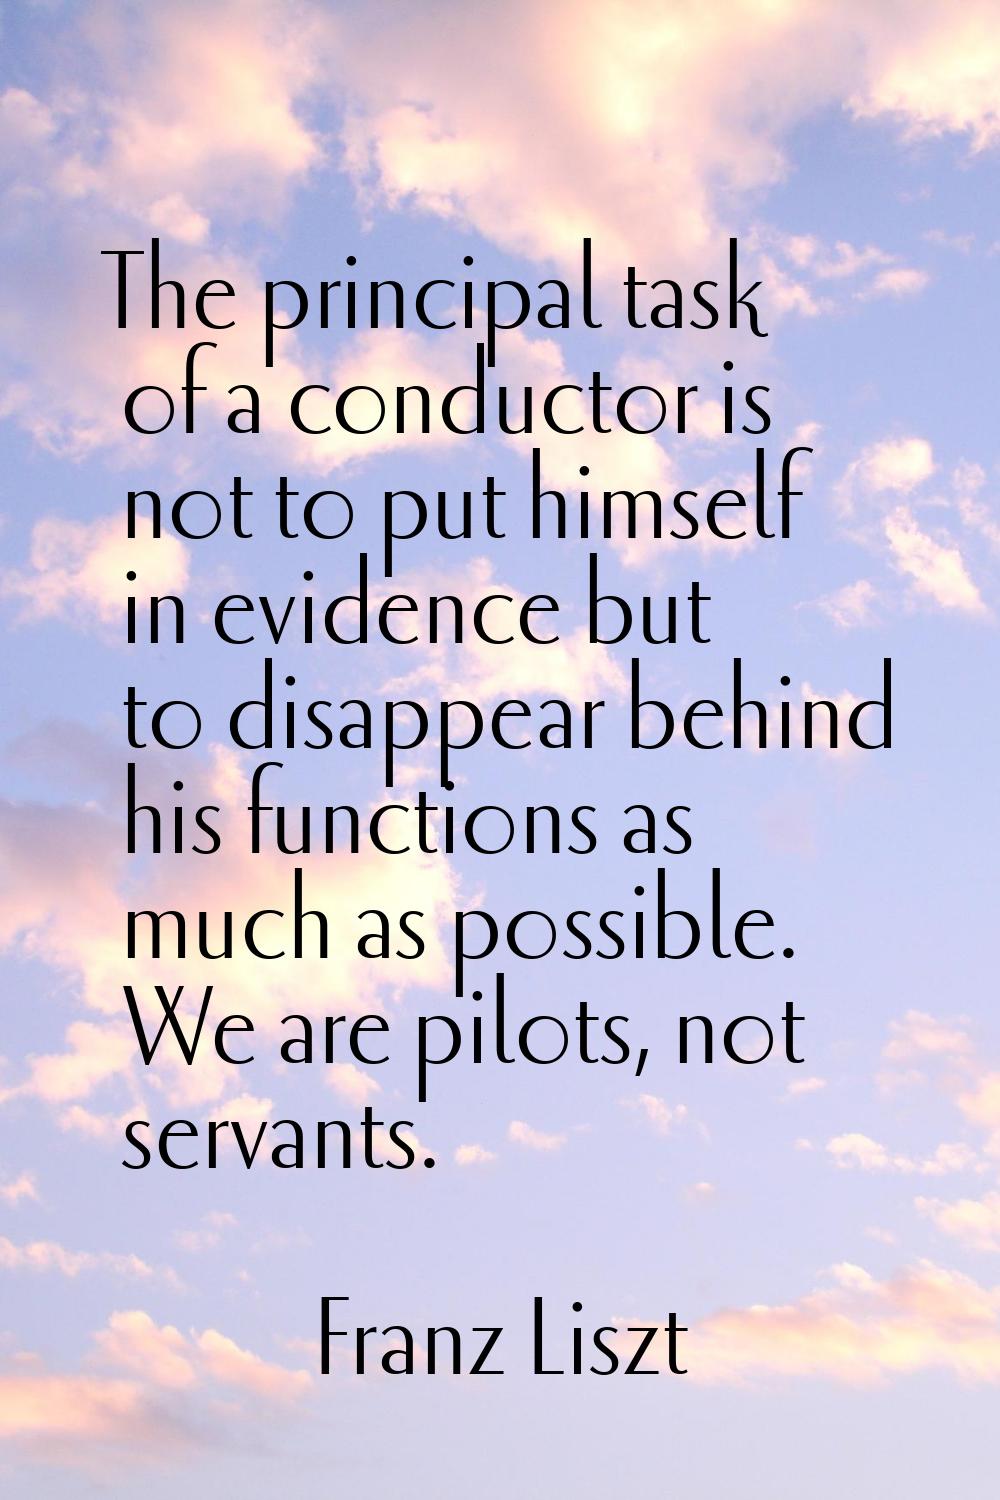 The principal task of a conductor is not to put himself in evidence but to disappear behind his fun